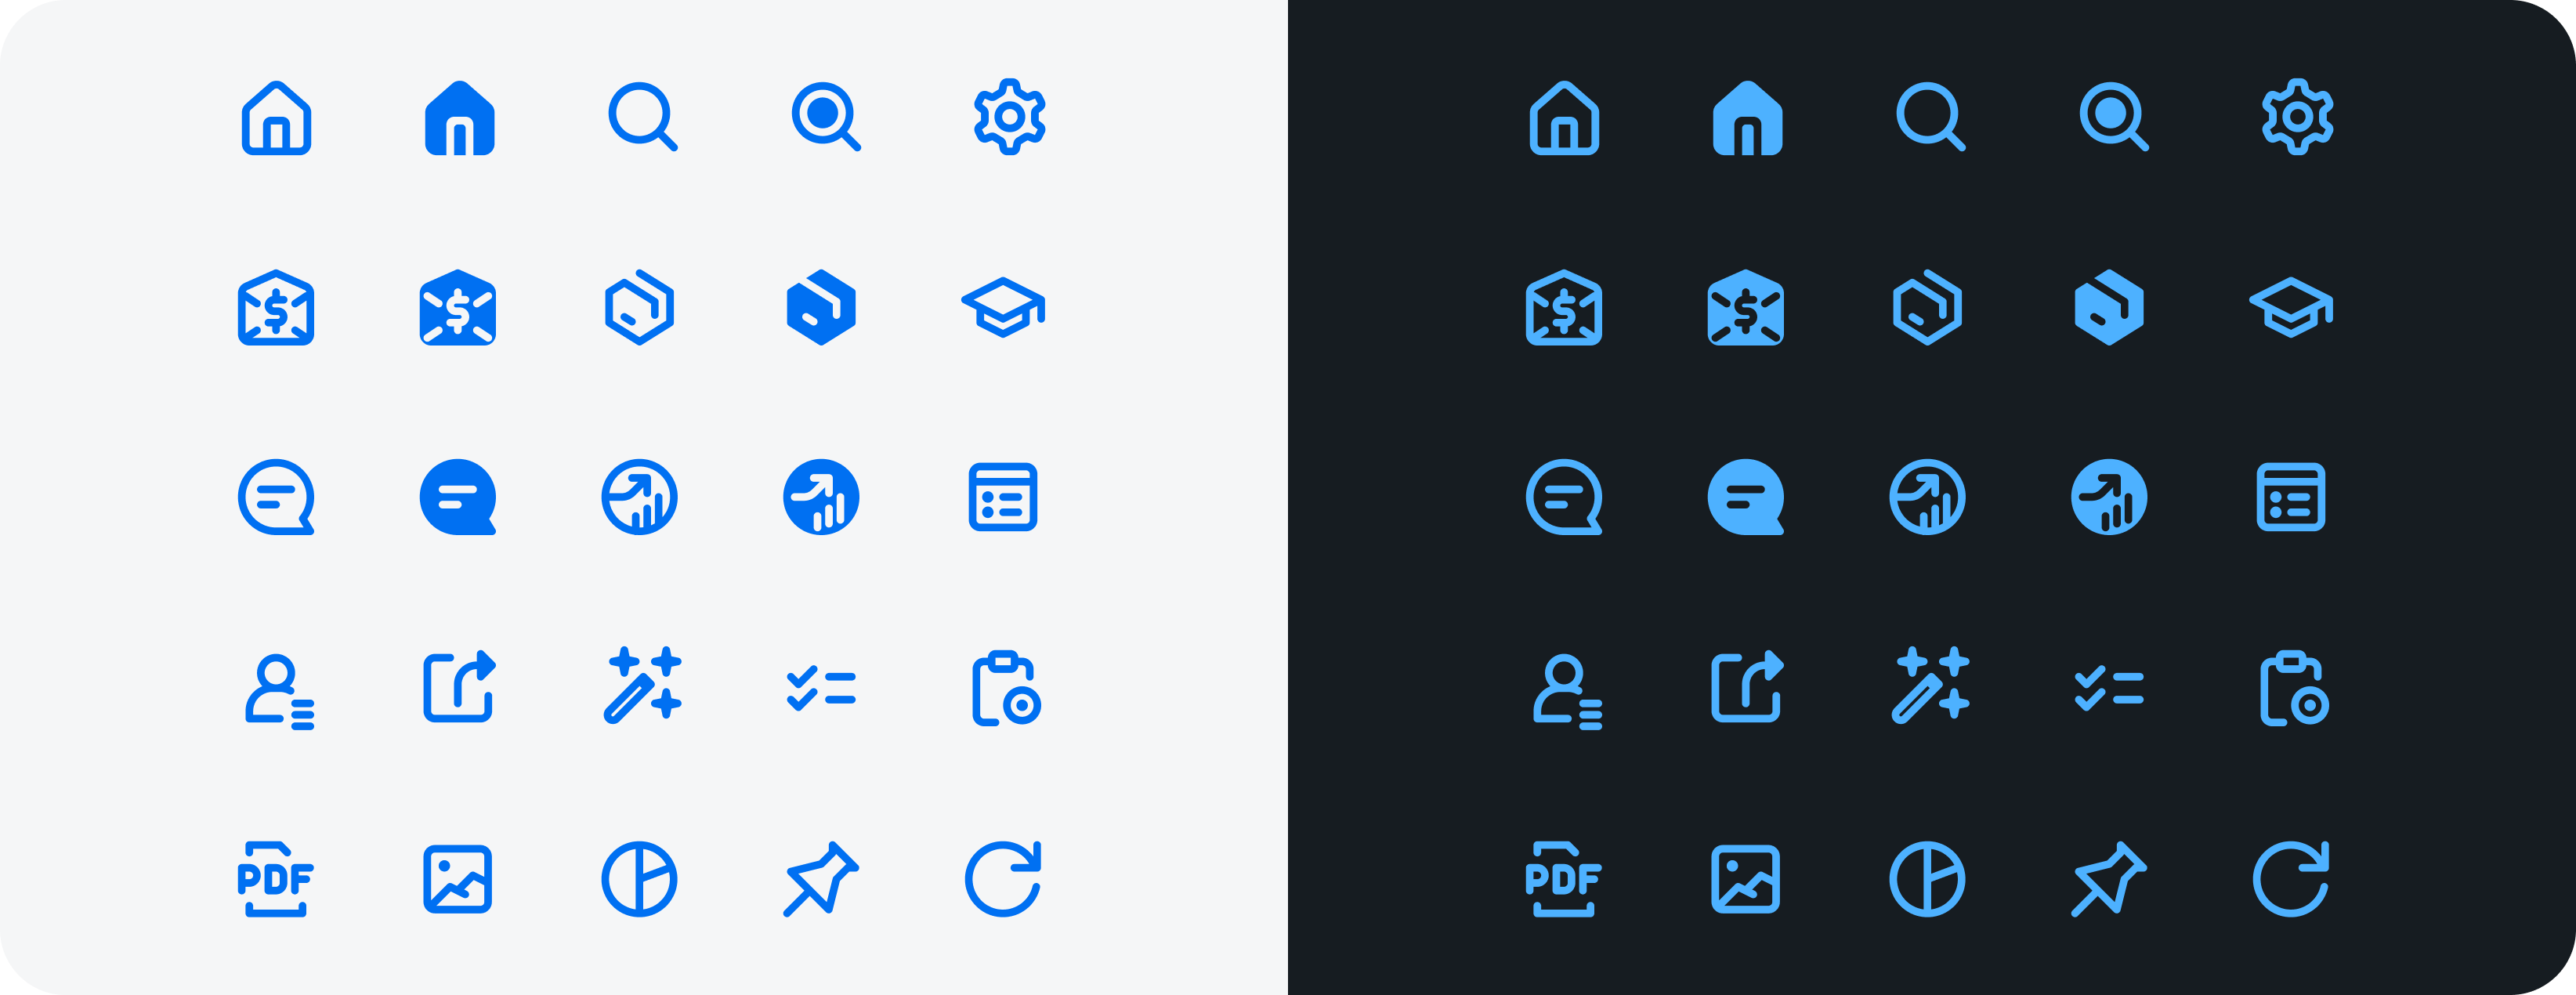 SAP Fiori for iOS icons in light and dark mode